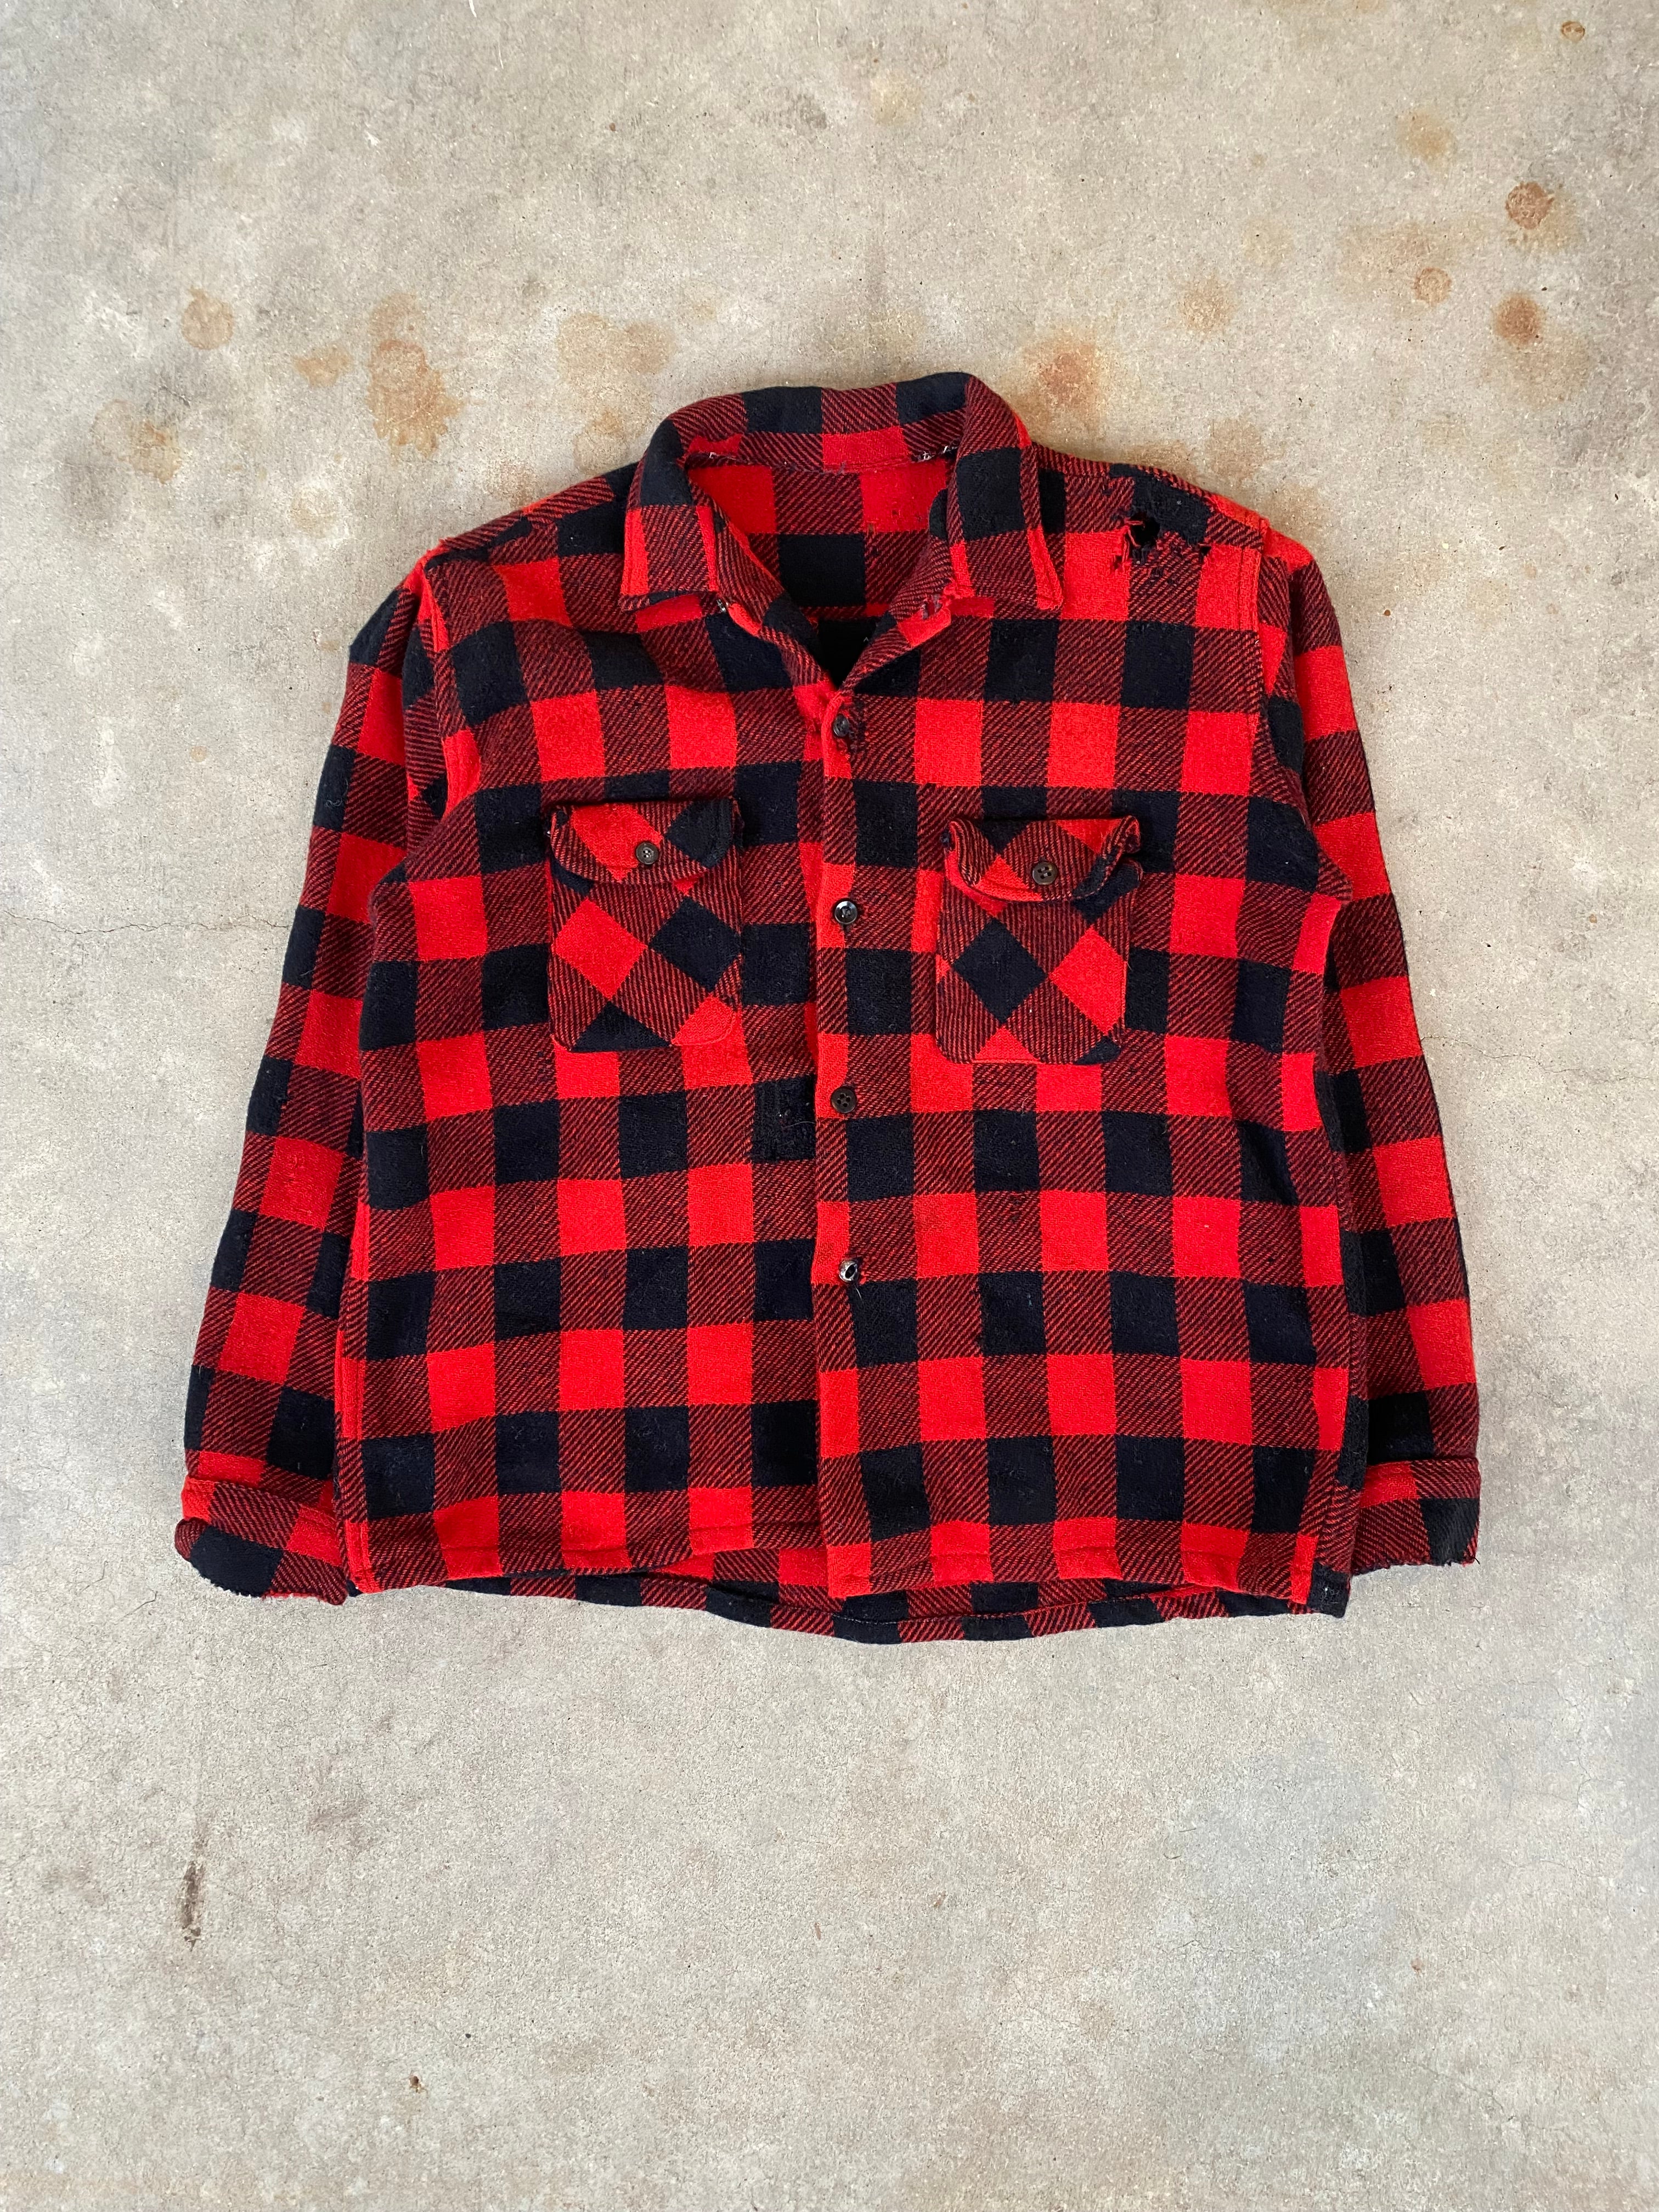 50s/60s Distressed Flannel